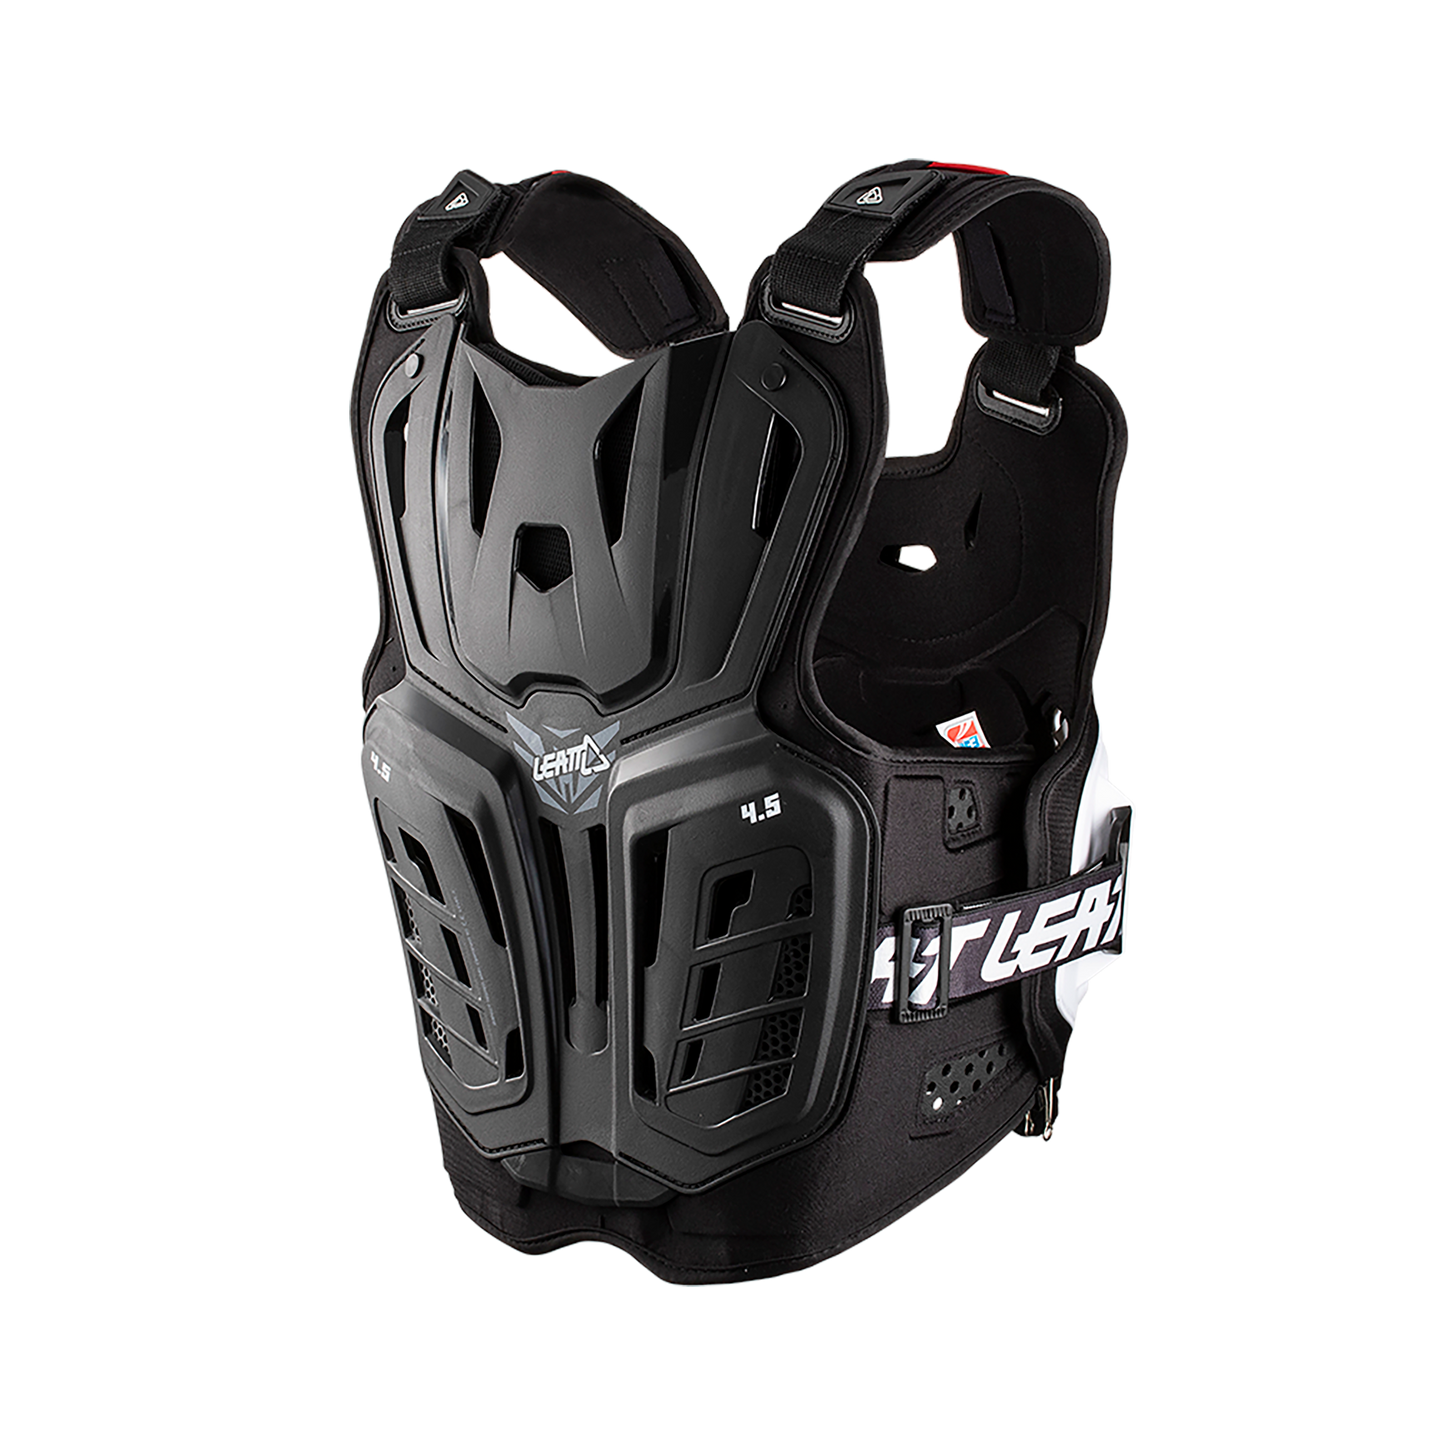 Chest Protector 4.5 - Black